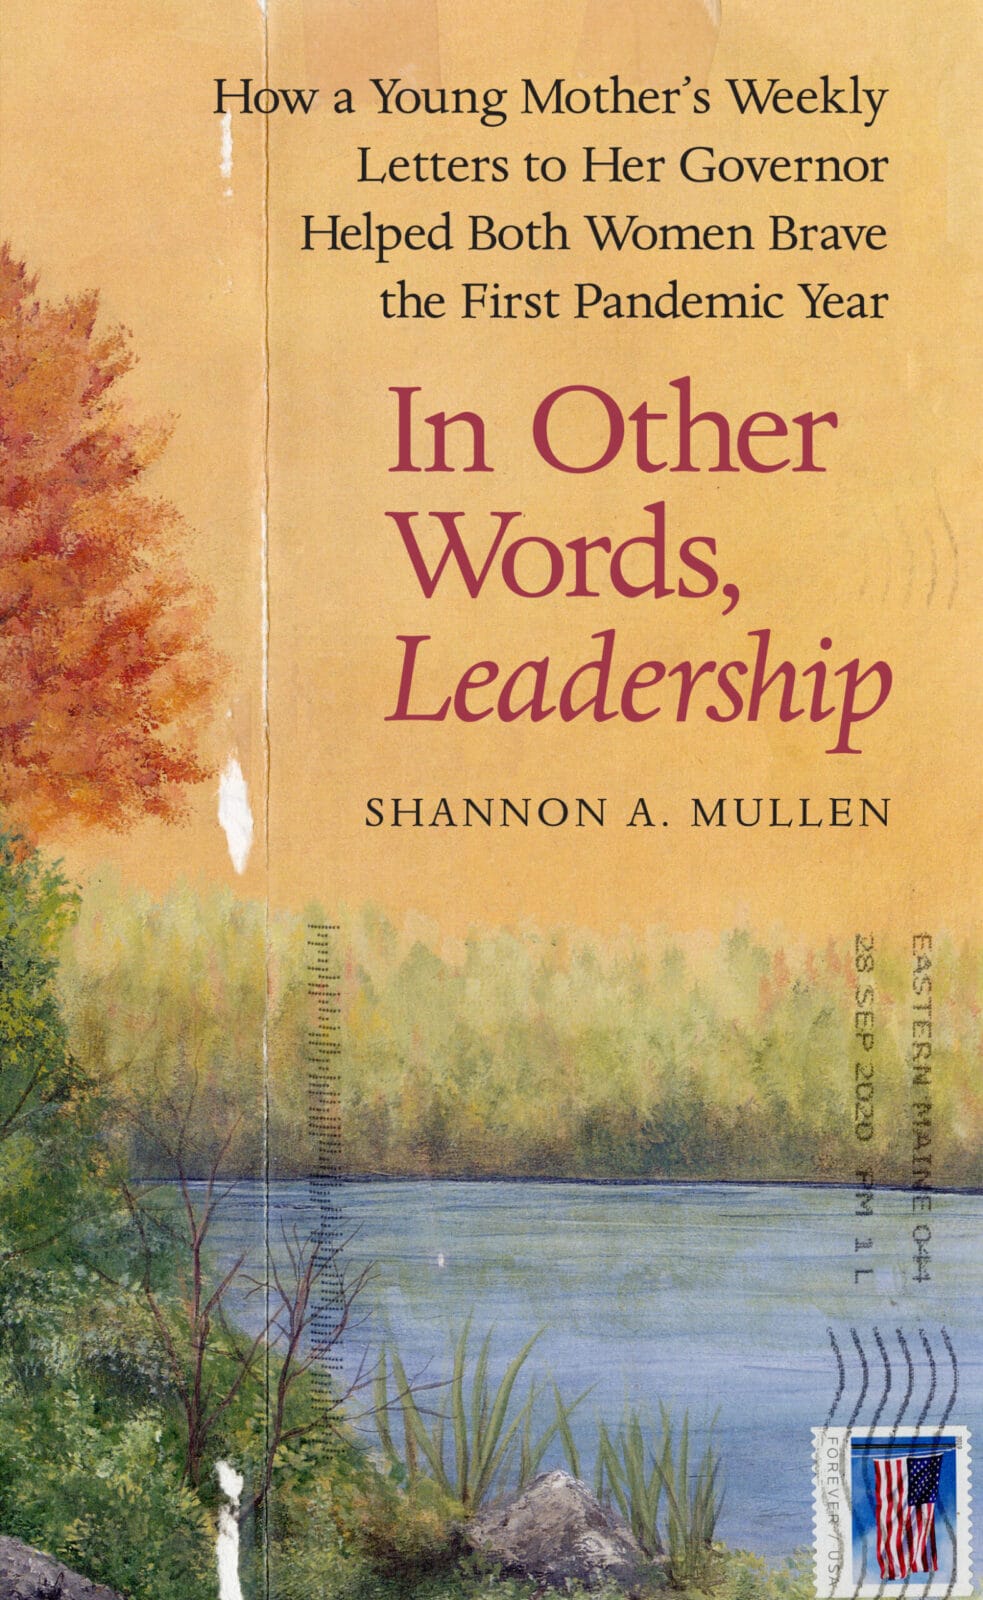 In Other Words Leadership a Book by Shannon Mullen